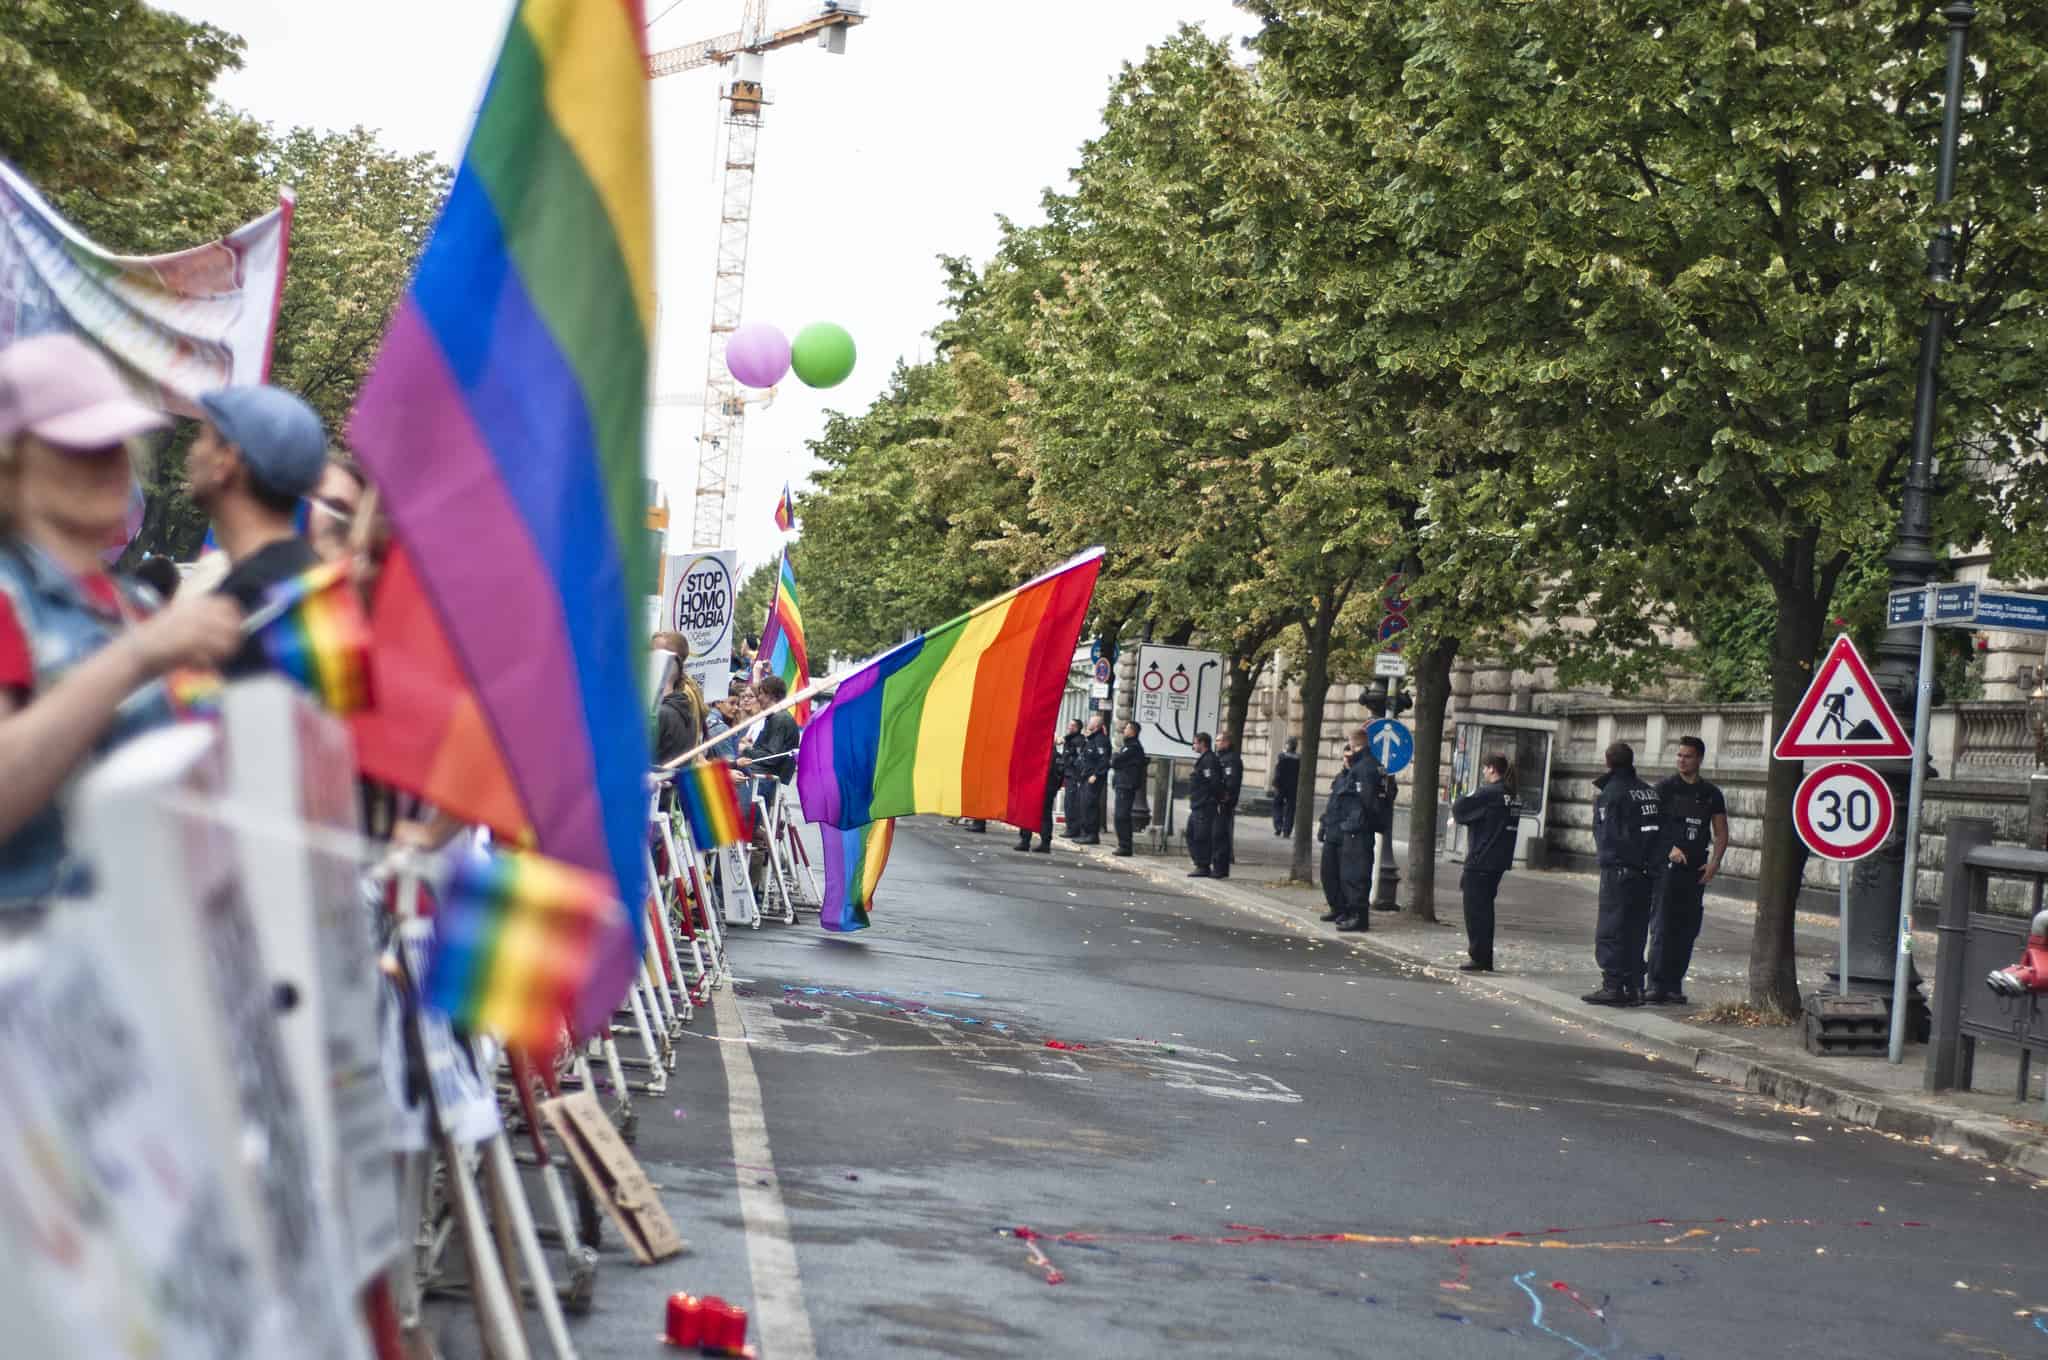 People holding rainbow flags line up on one side of the street; across the street is a line of police.